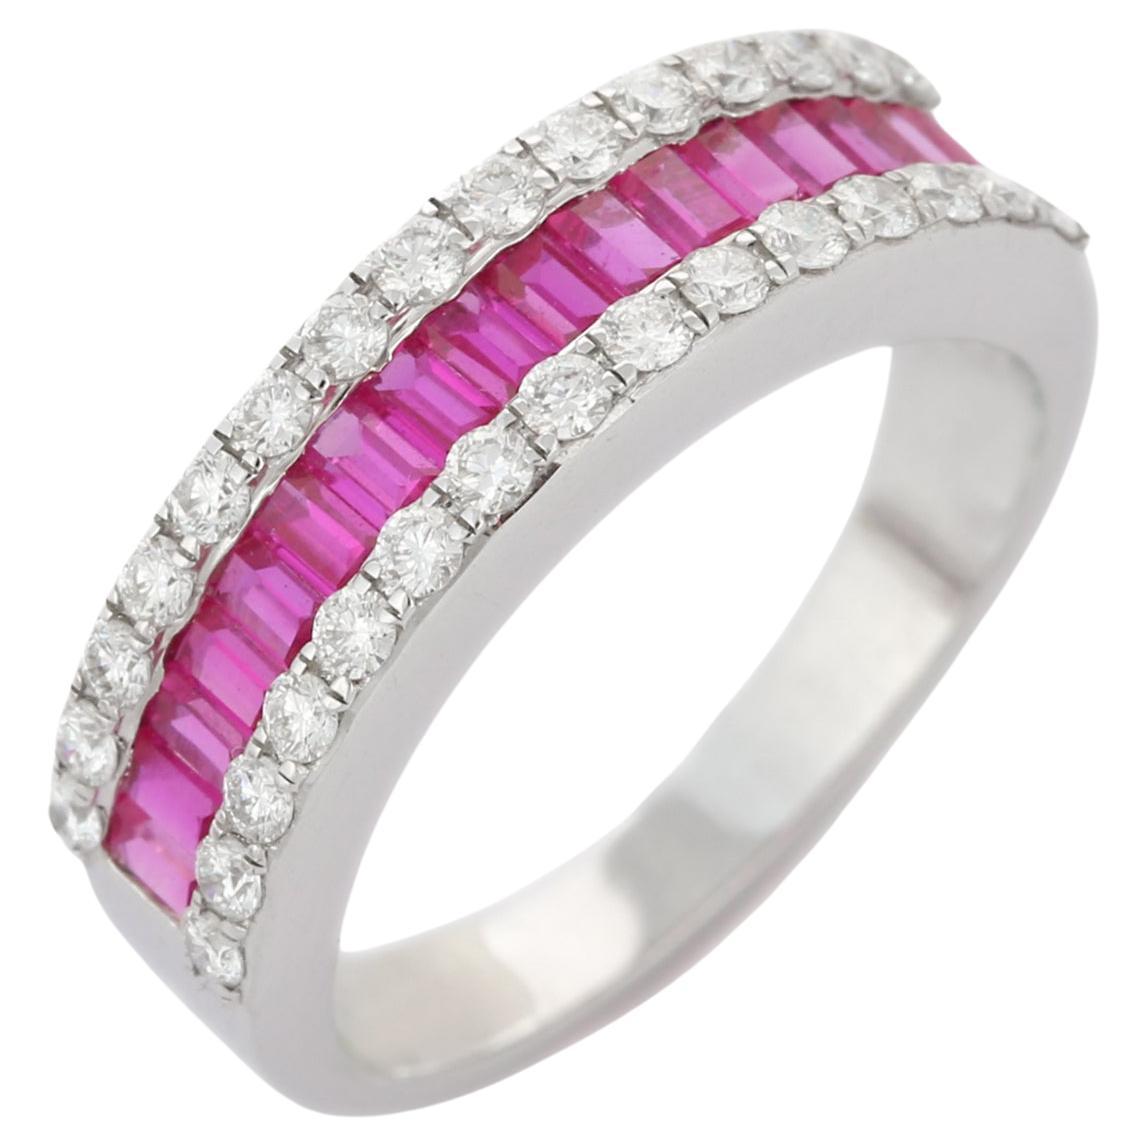 For Sale:  18K White Gold 0.76 Ct Ruby Wedding Band Ring with Diamonds